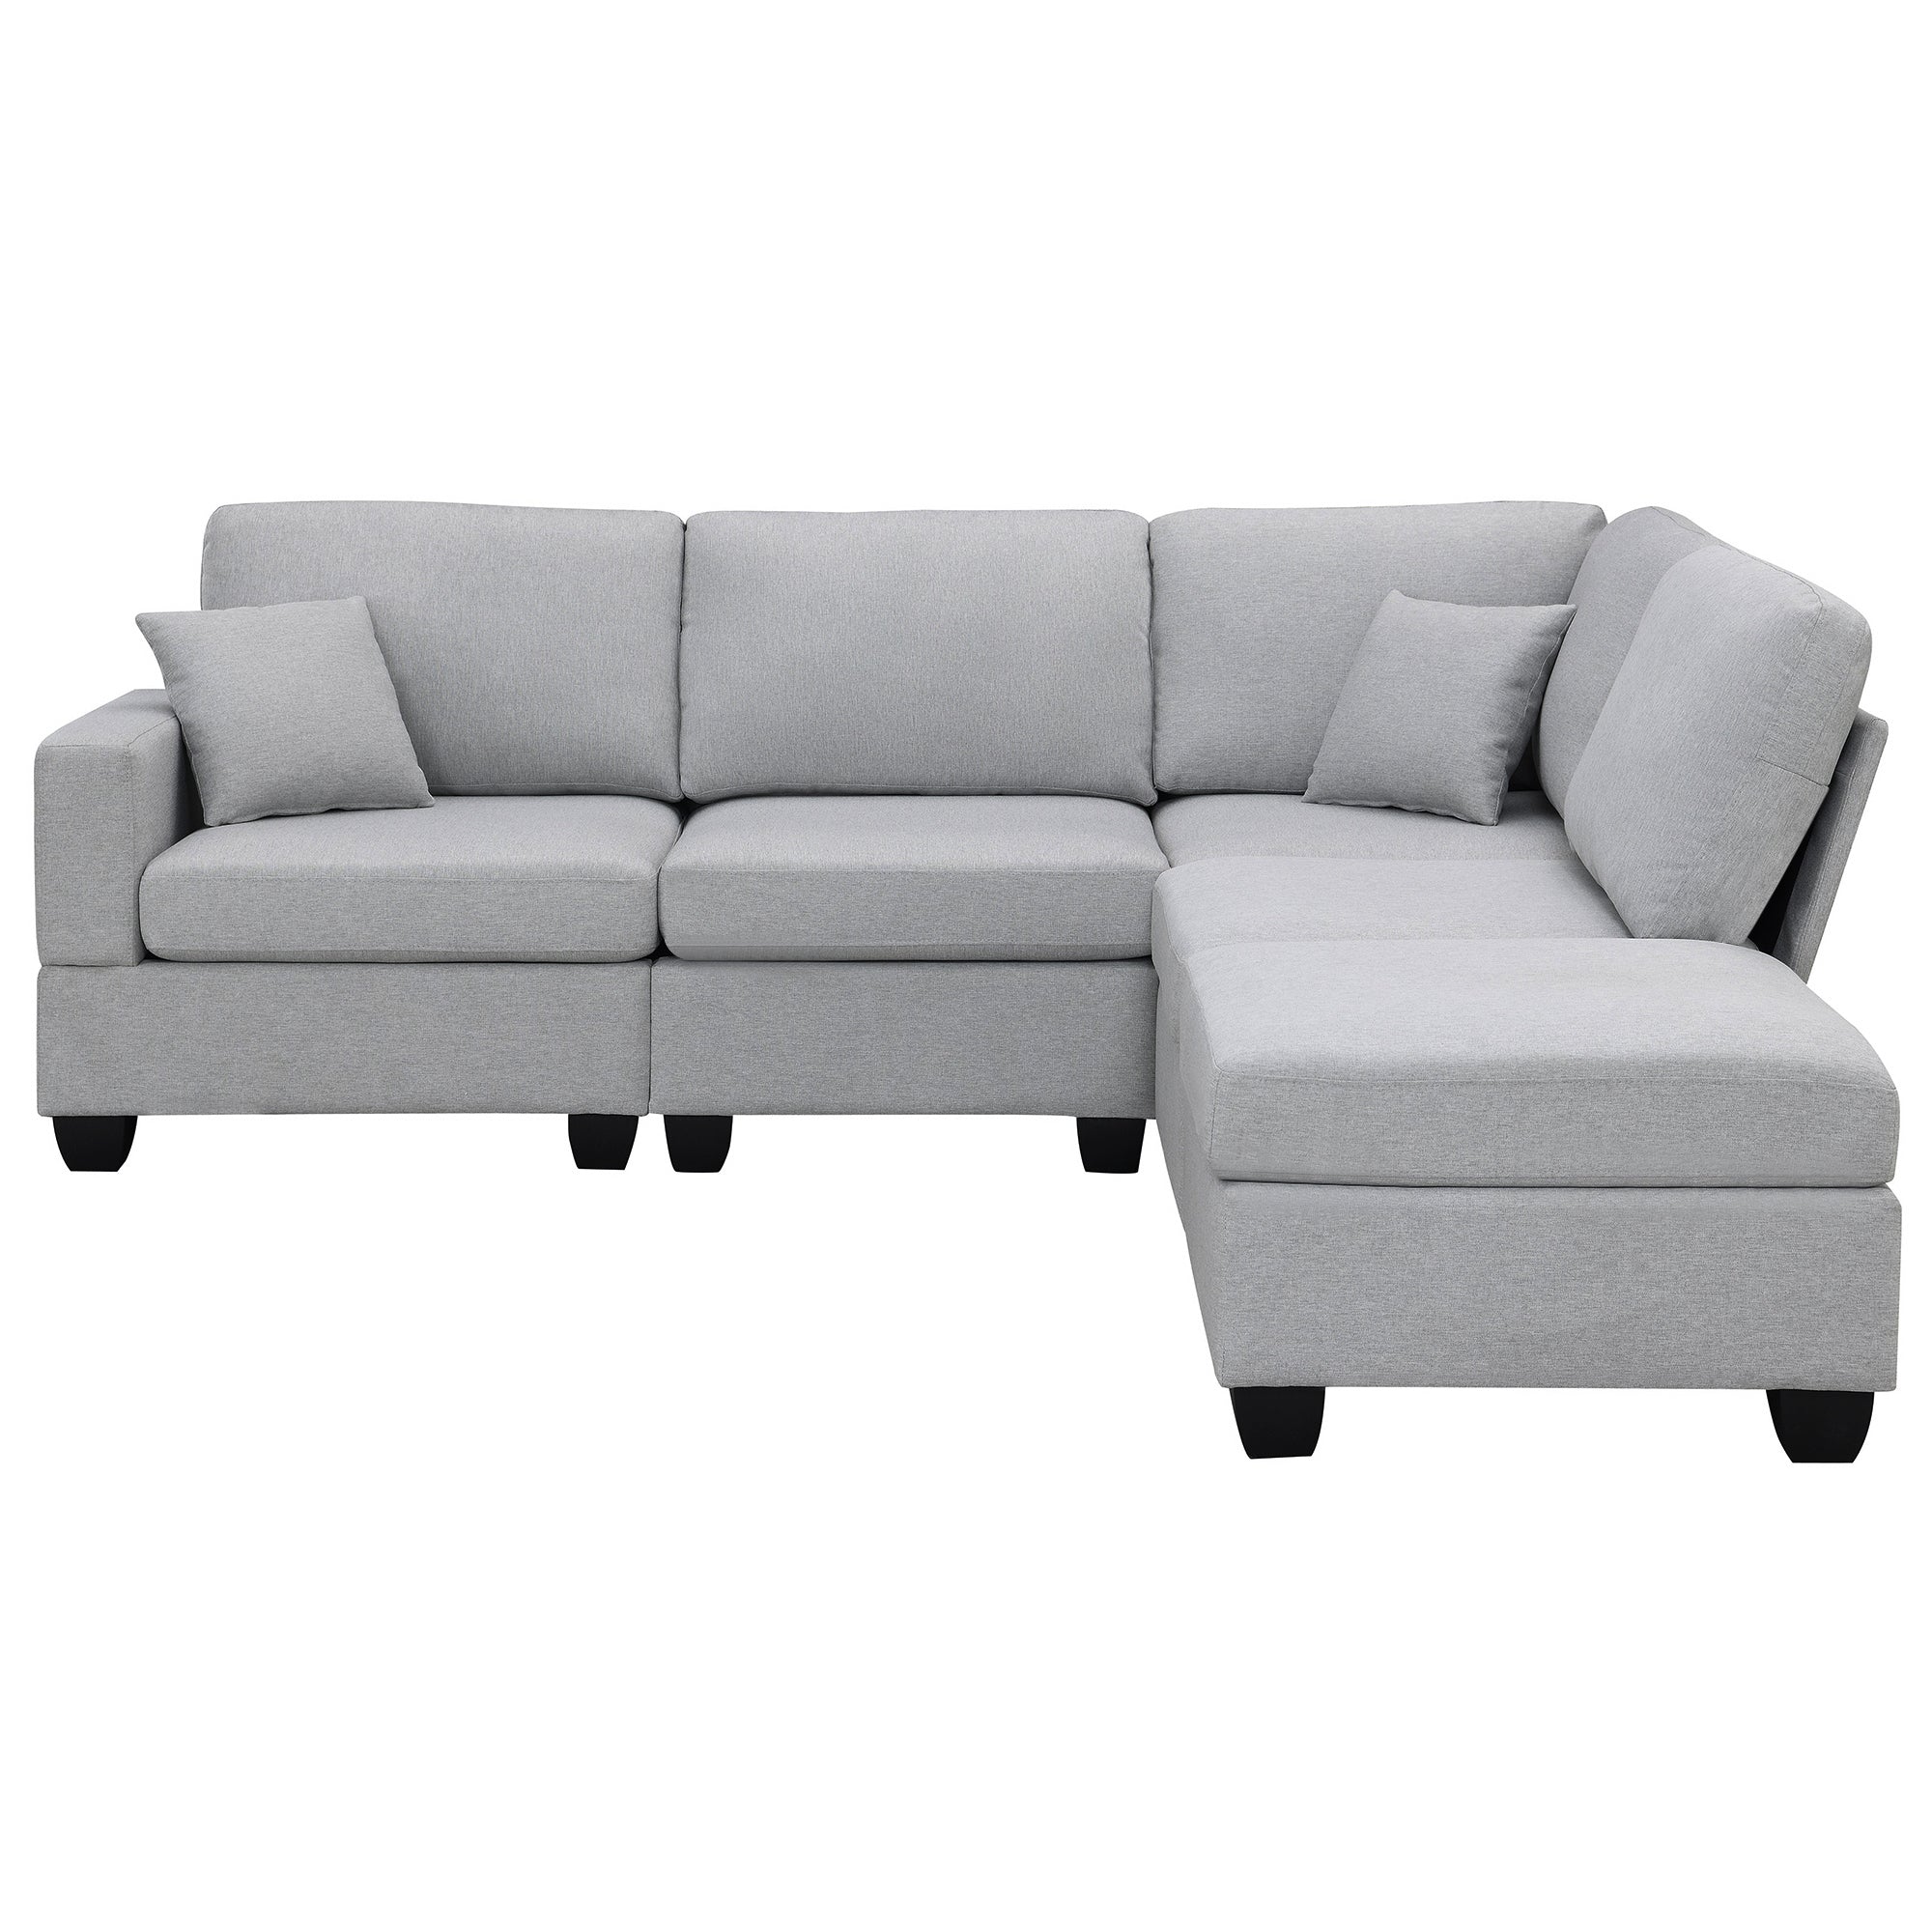 Gray L Shaped Sectional Sofa with Convertible Ottoman | Linen Fabric-Stationary Sectionals-American Furniture Outlet